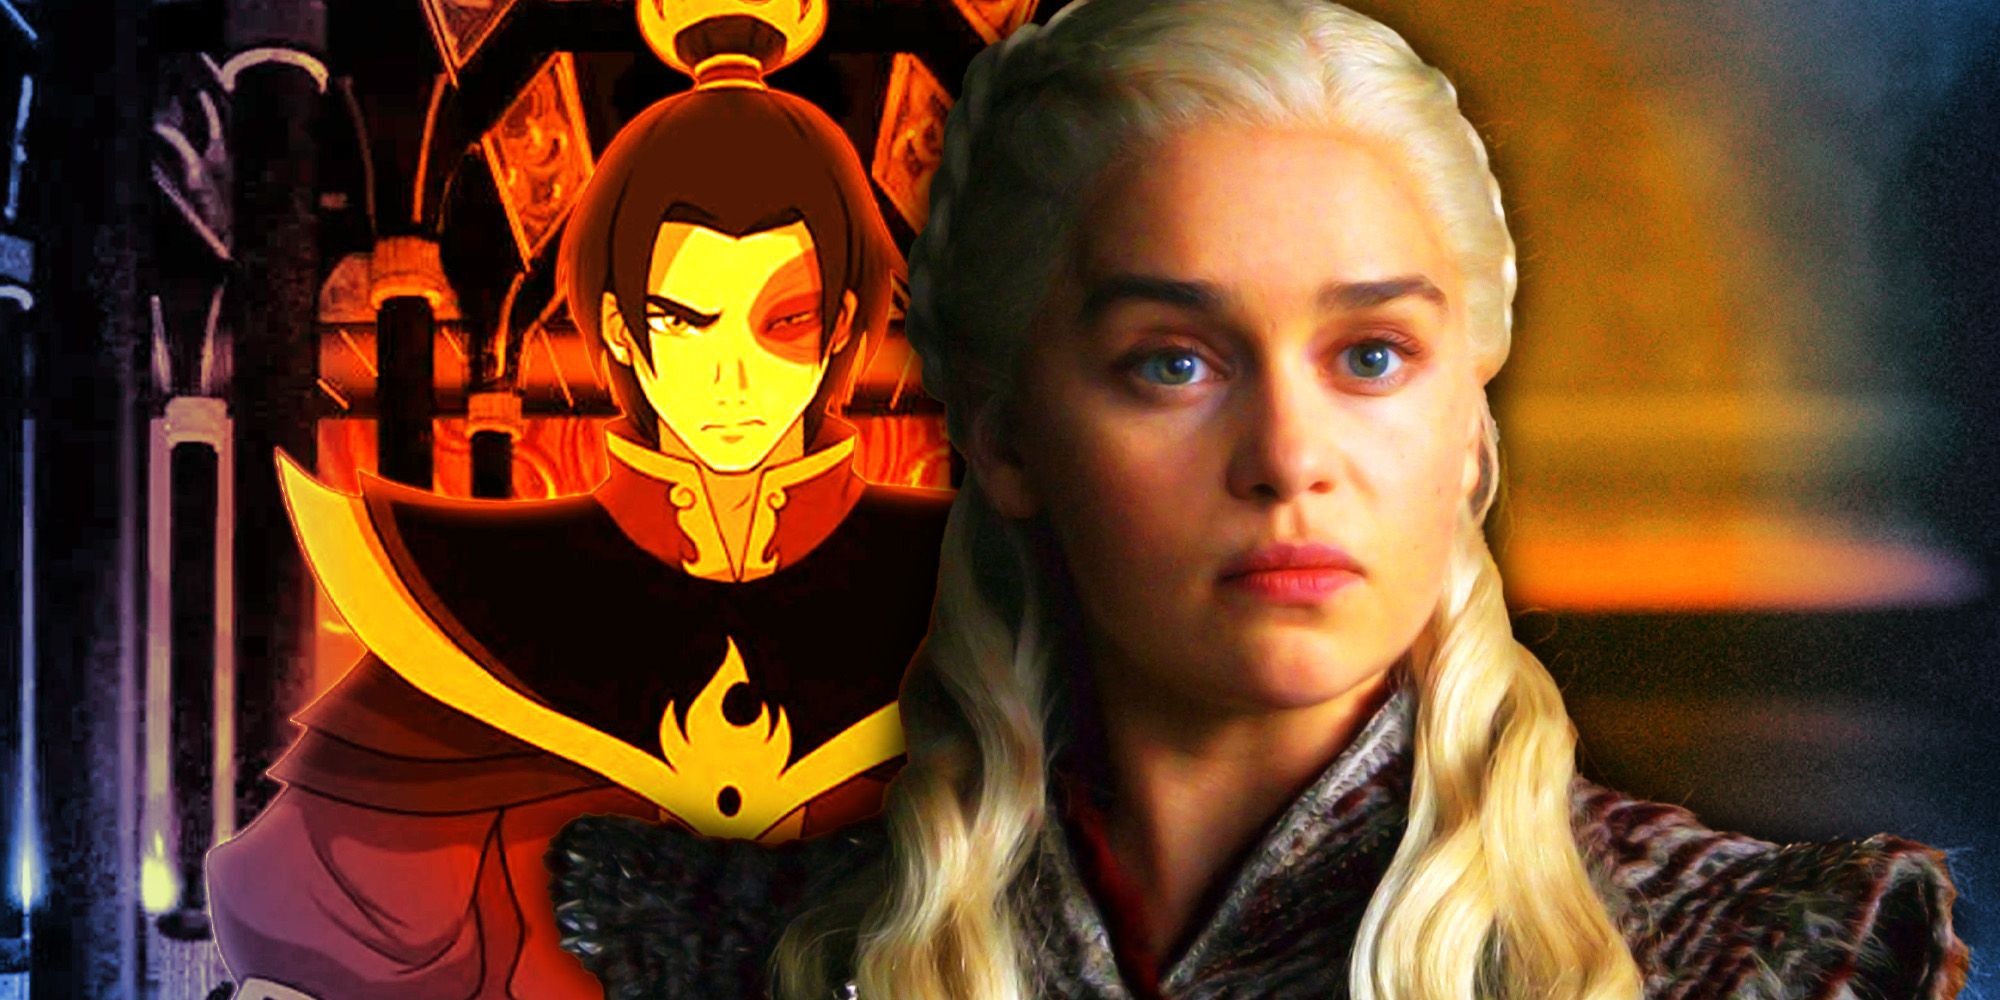 Daenerys from Game of Thrones and Zuko from Avatar